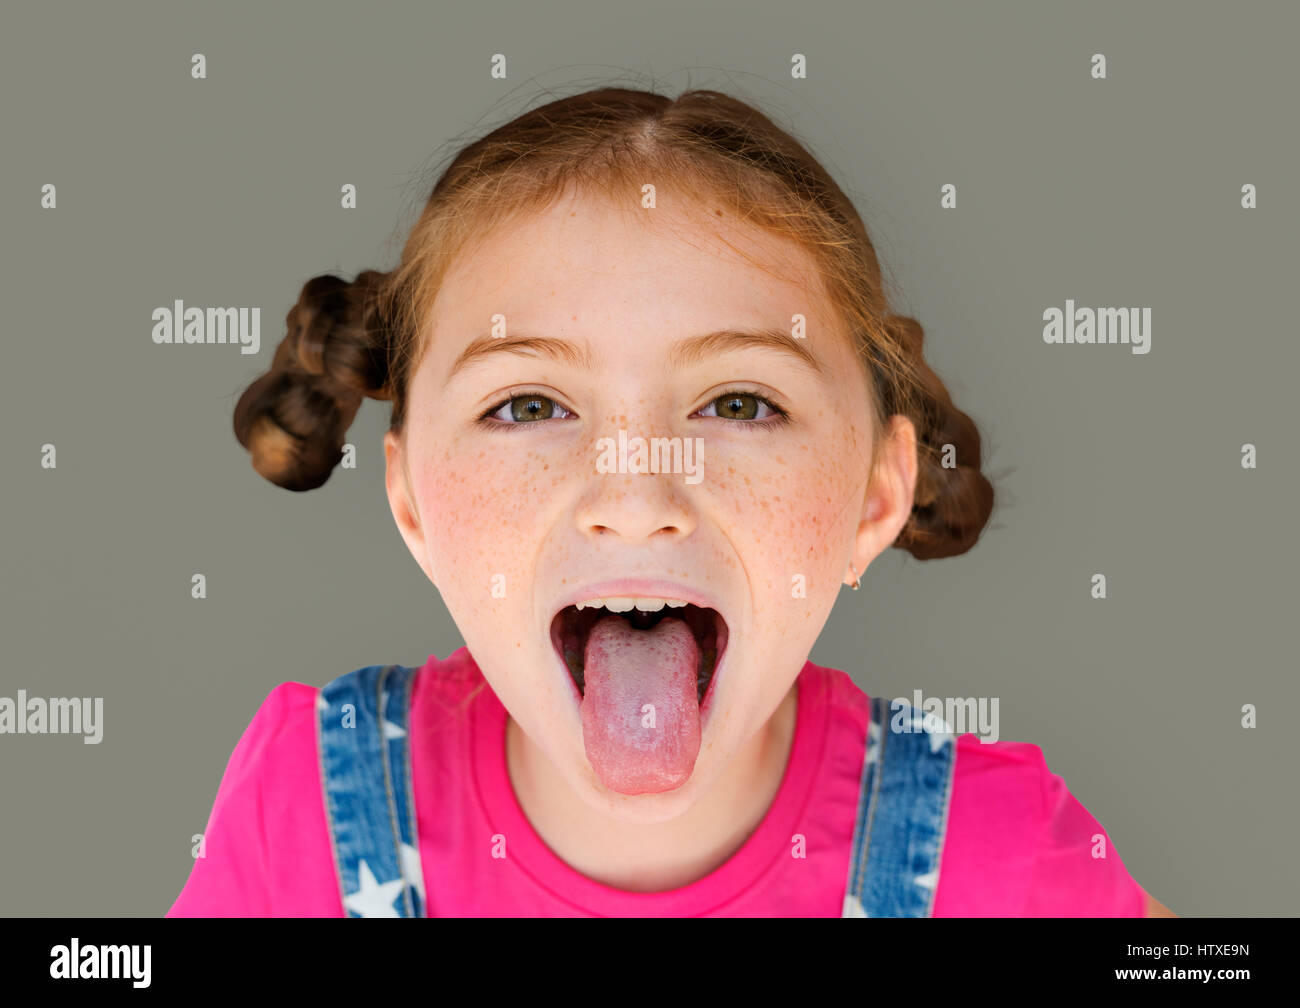 Little Girl Smiling Happiness Sticking Out Tongue Studio Portrait Stock Photo